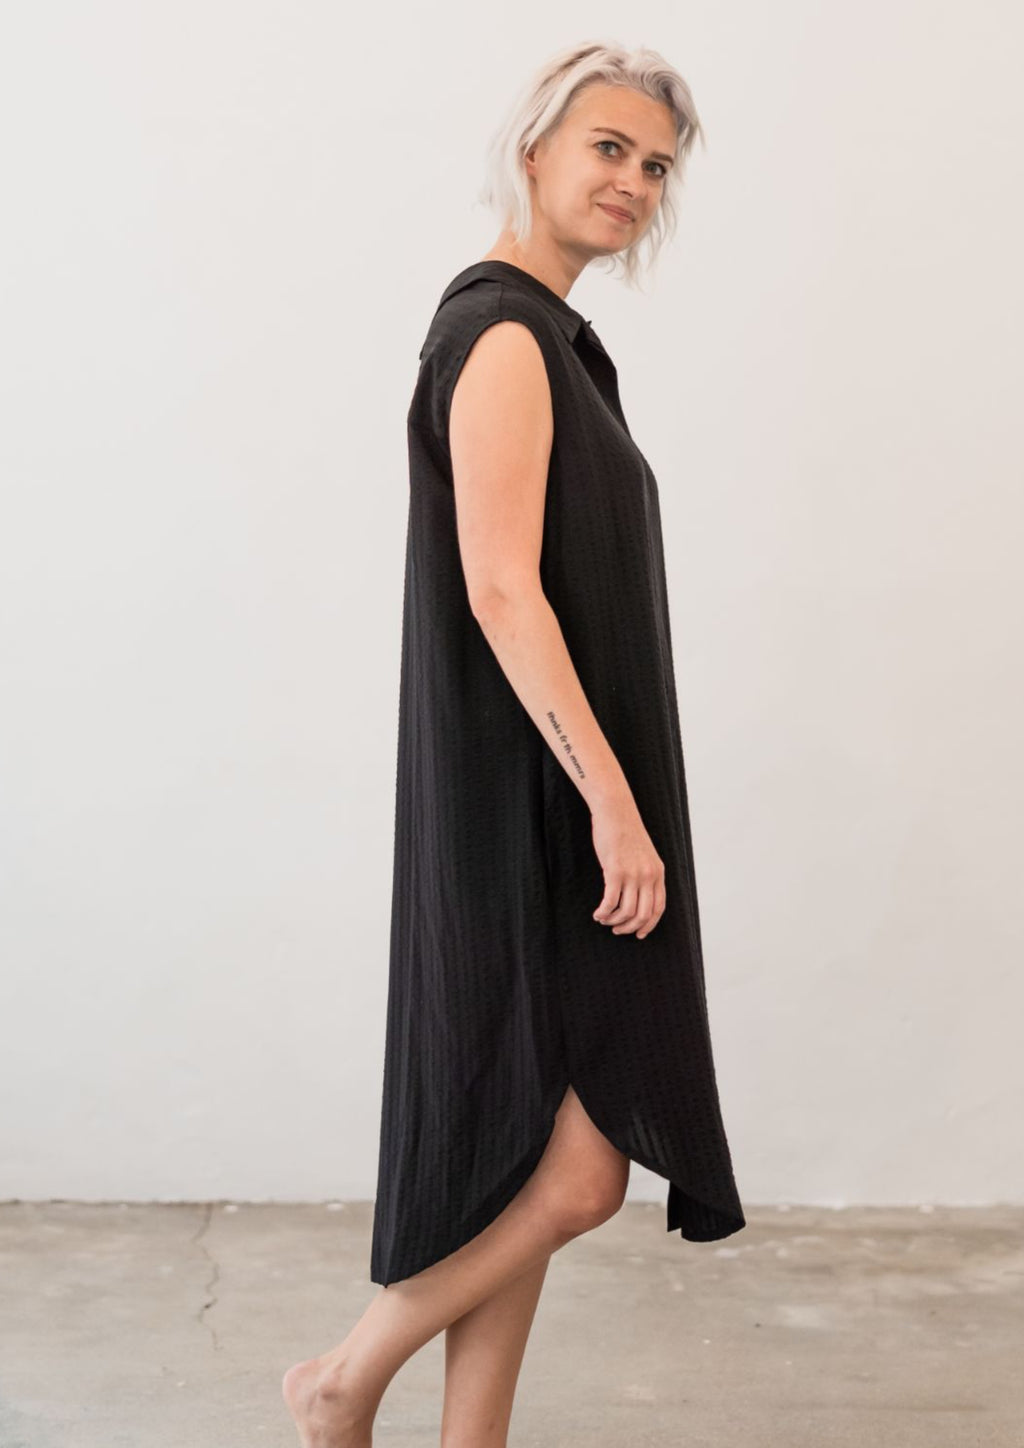 Reversible soft dress. Can be worn as a long shirt, dress or tunic. With two collars and buttoned full-length opening. Textured fabric in black.